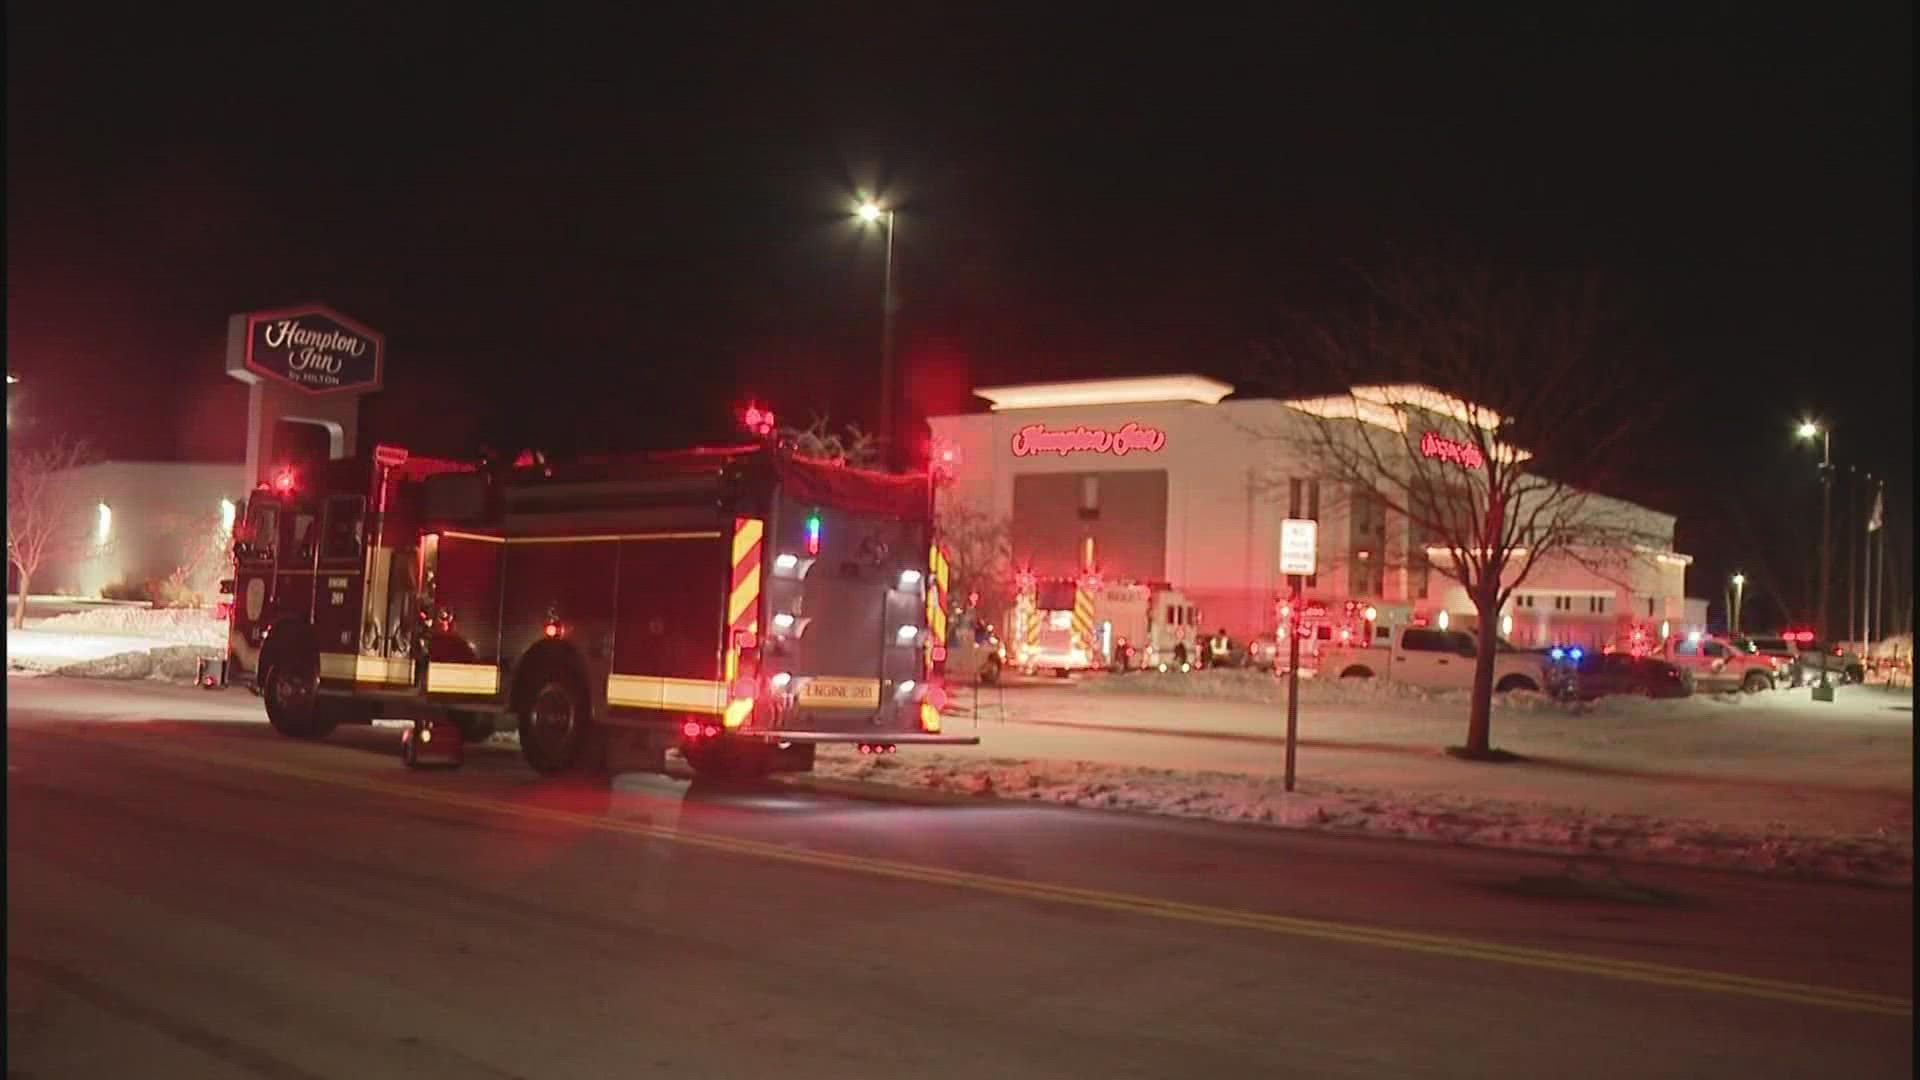 14 people were treated for exposure to elevated levels of carbon monoxide on Jan. 29.